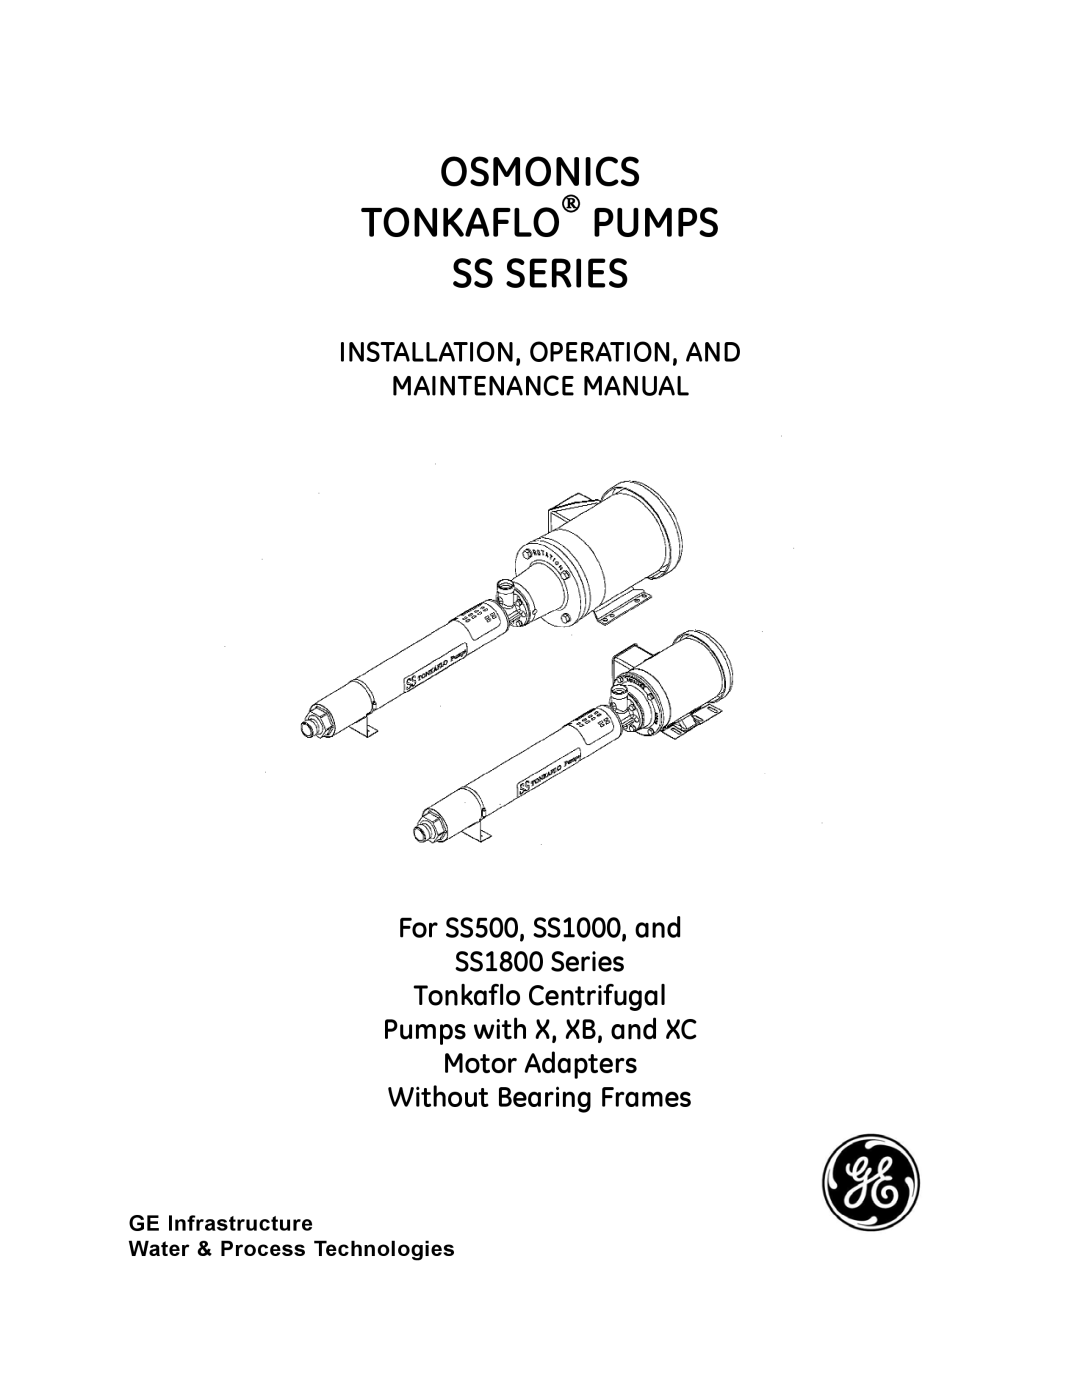 GE manual GE Water & Process Technologies, Tonkaflo Pumps Ss Series, For SS500, SS1000, and SS1800 Series 